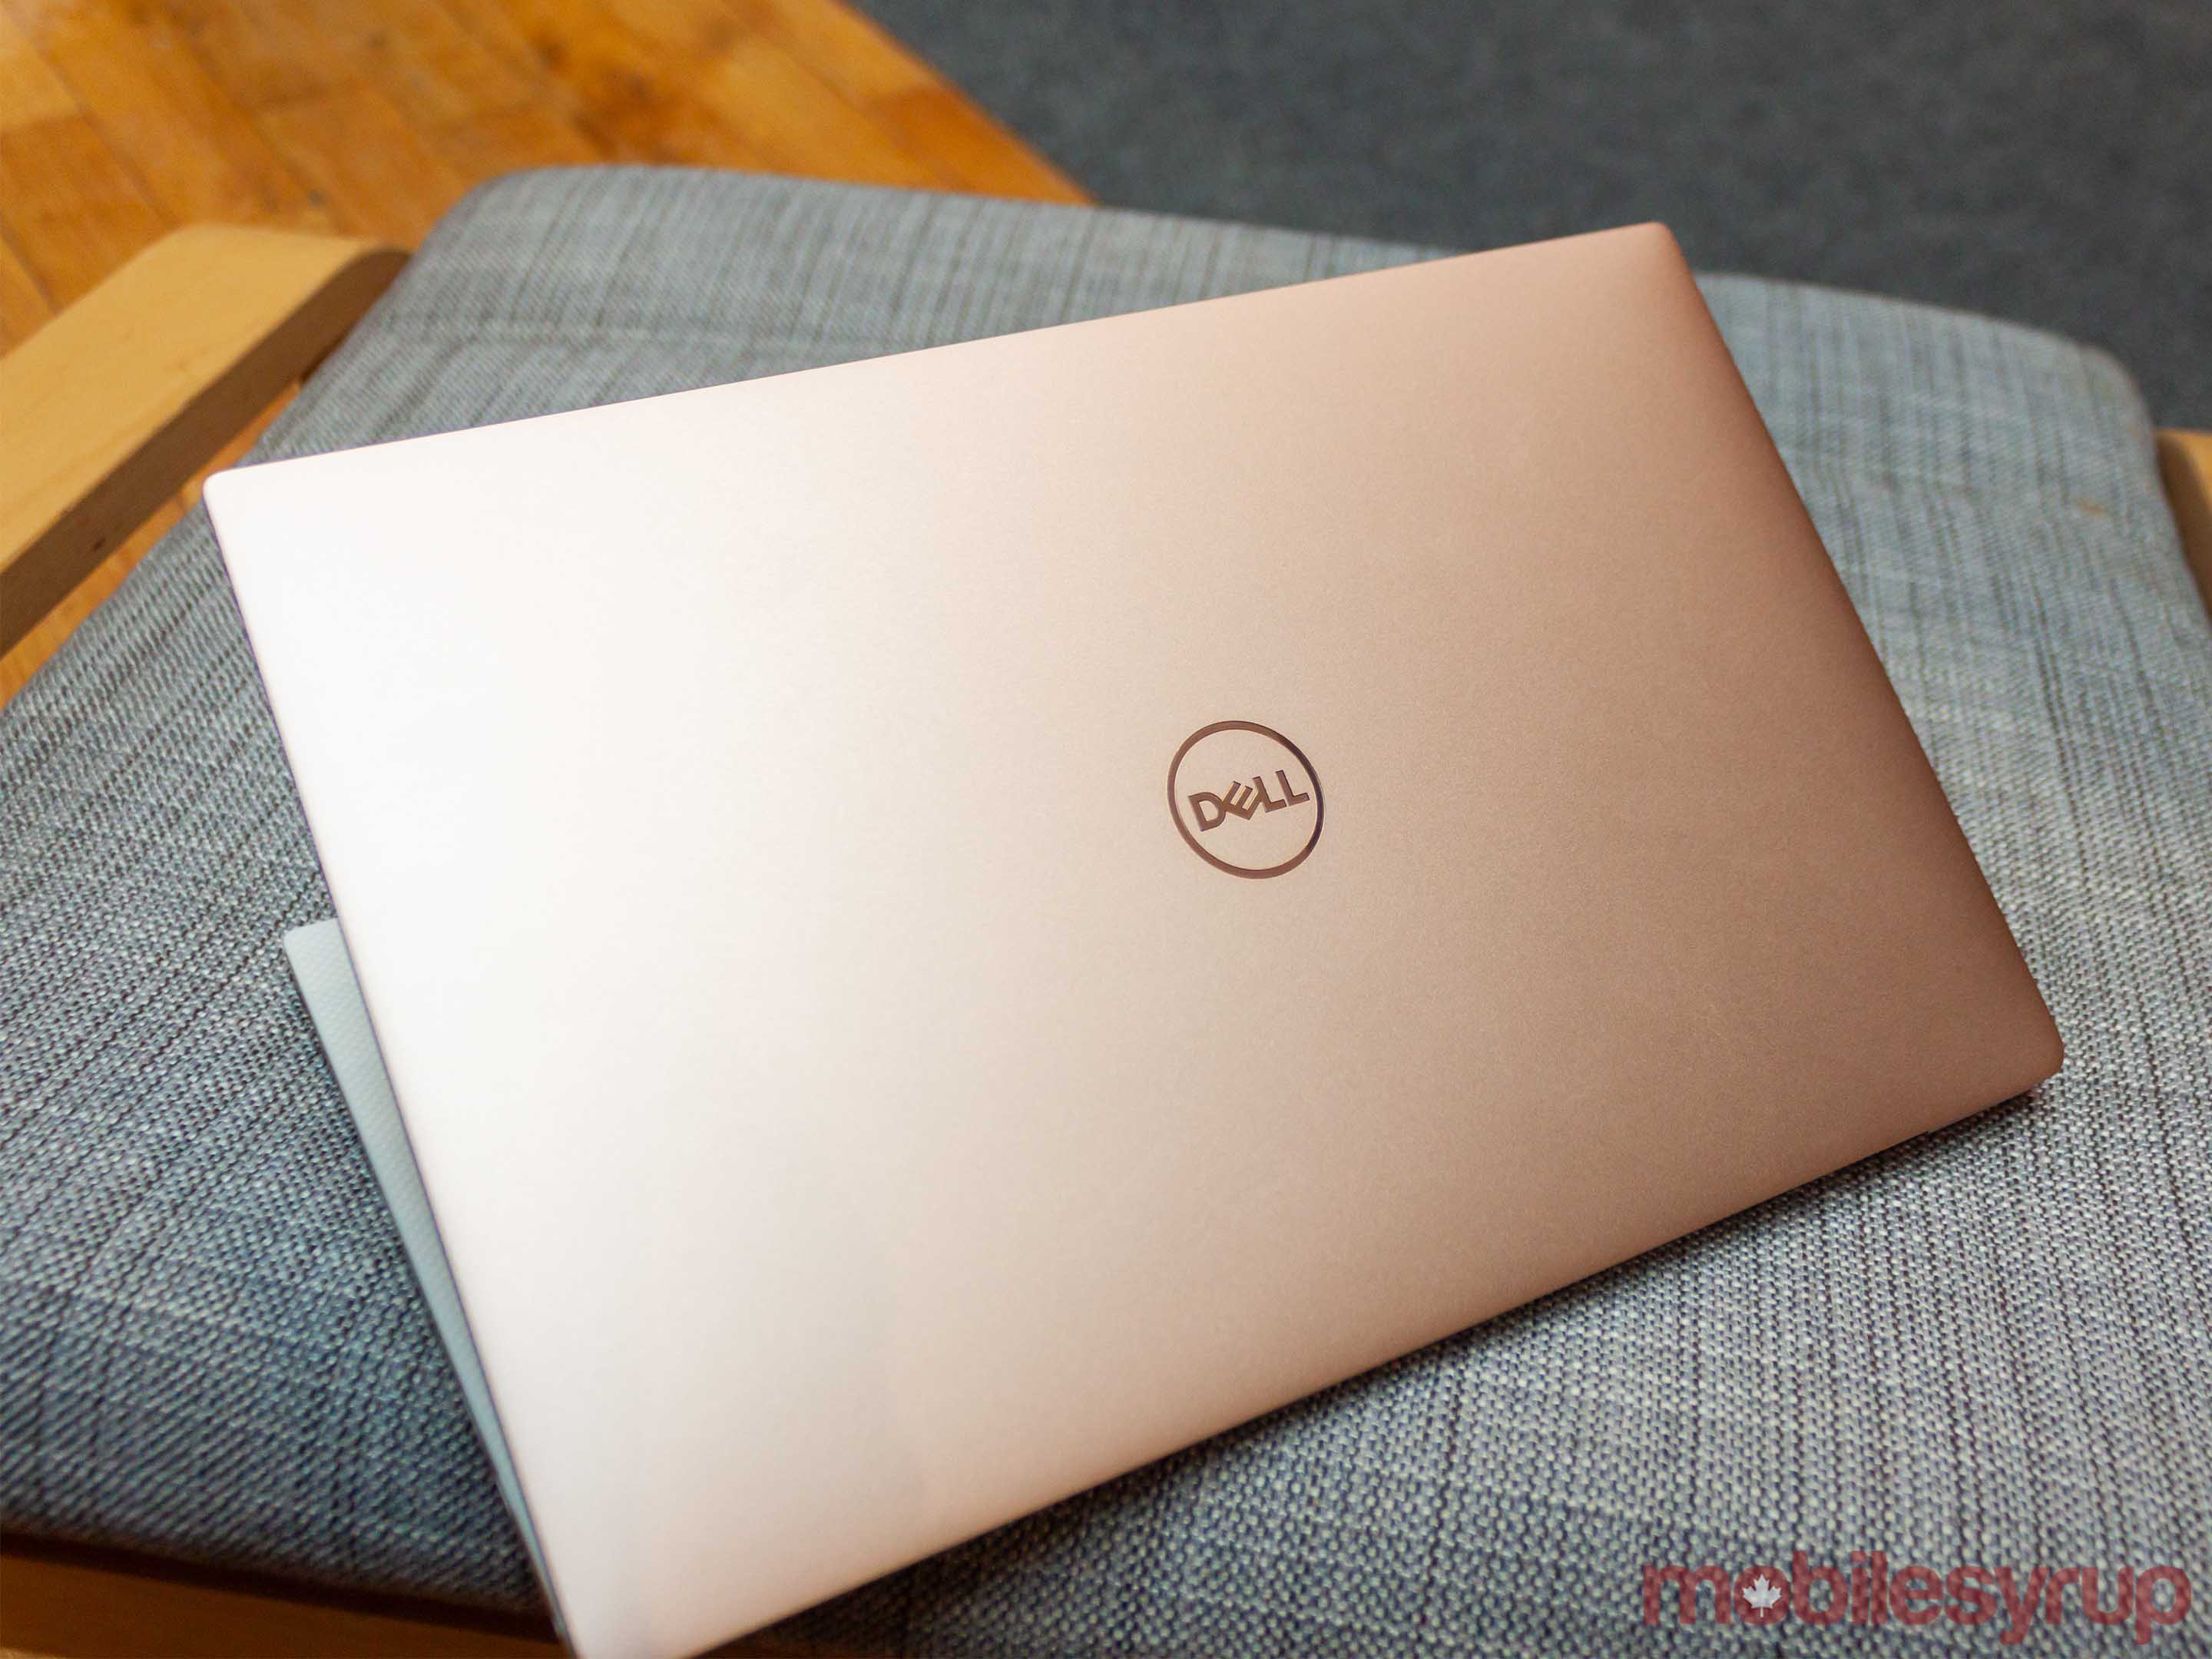 Dell XPS 13 in new Gold and White colour